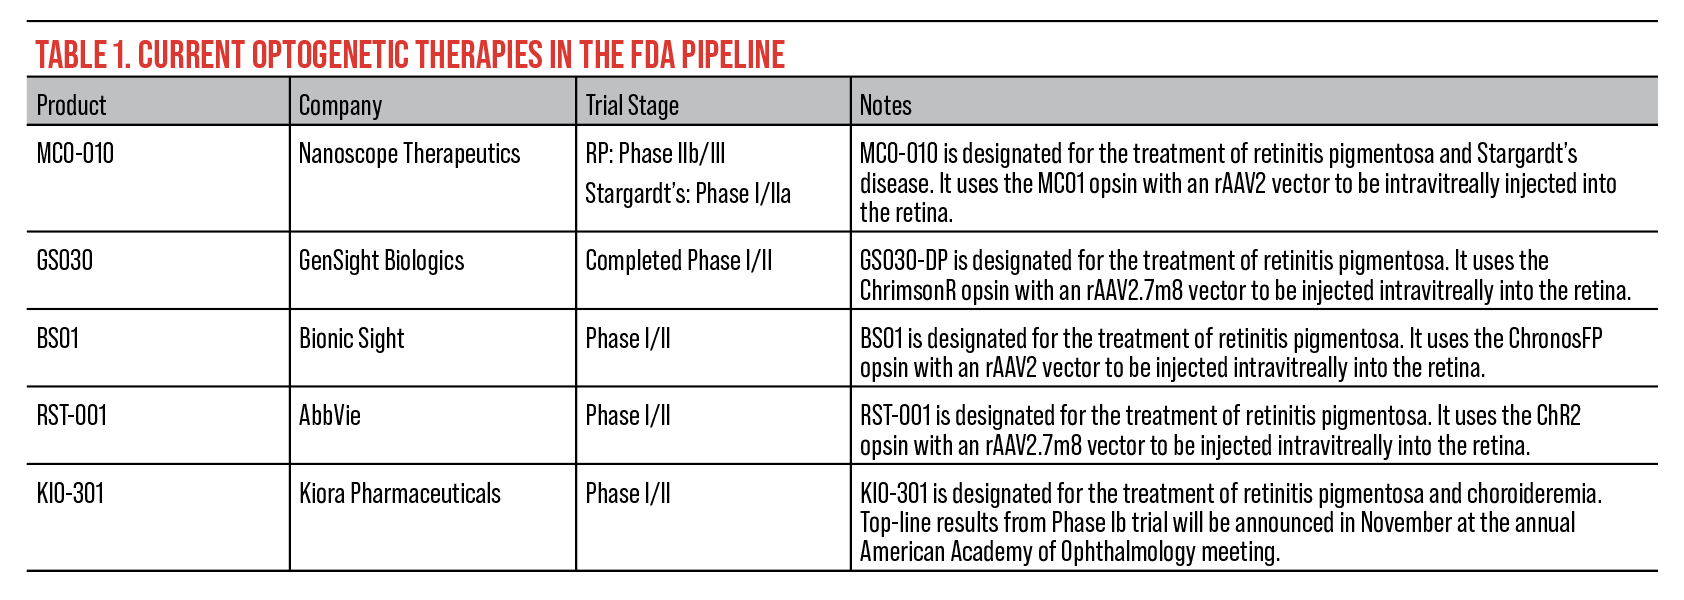 Table 1. Current Optogenetic Therapies in the FDA Pipeline